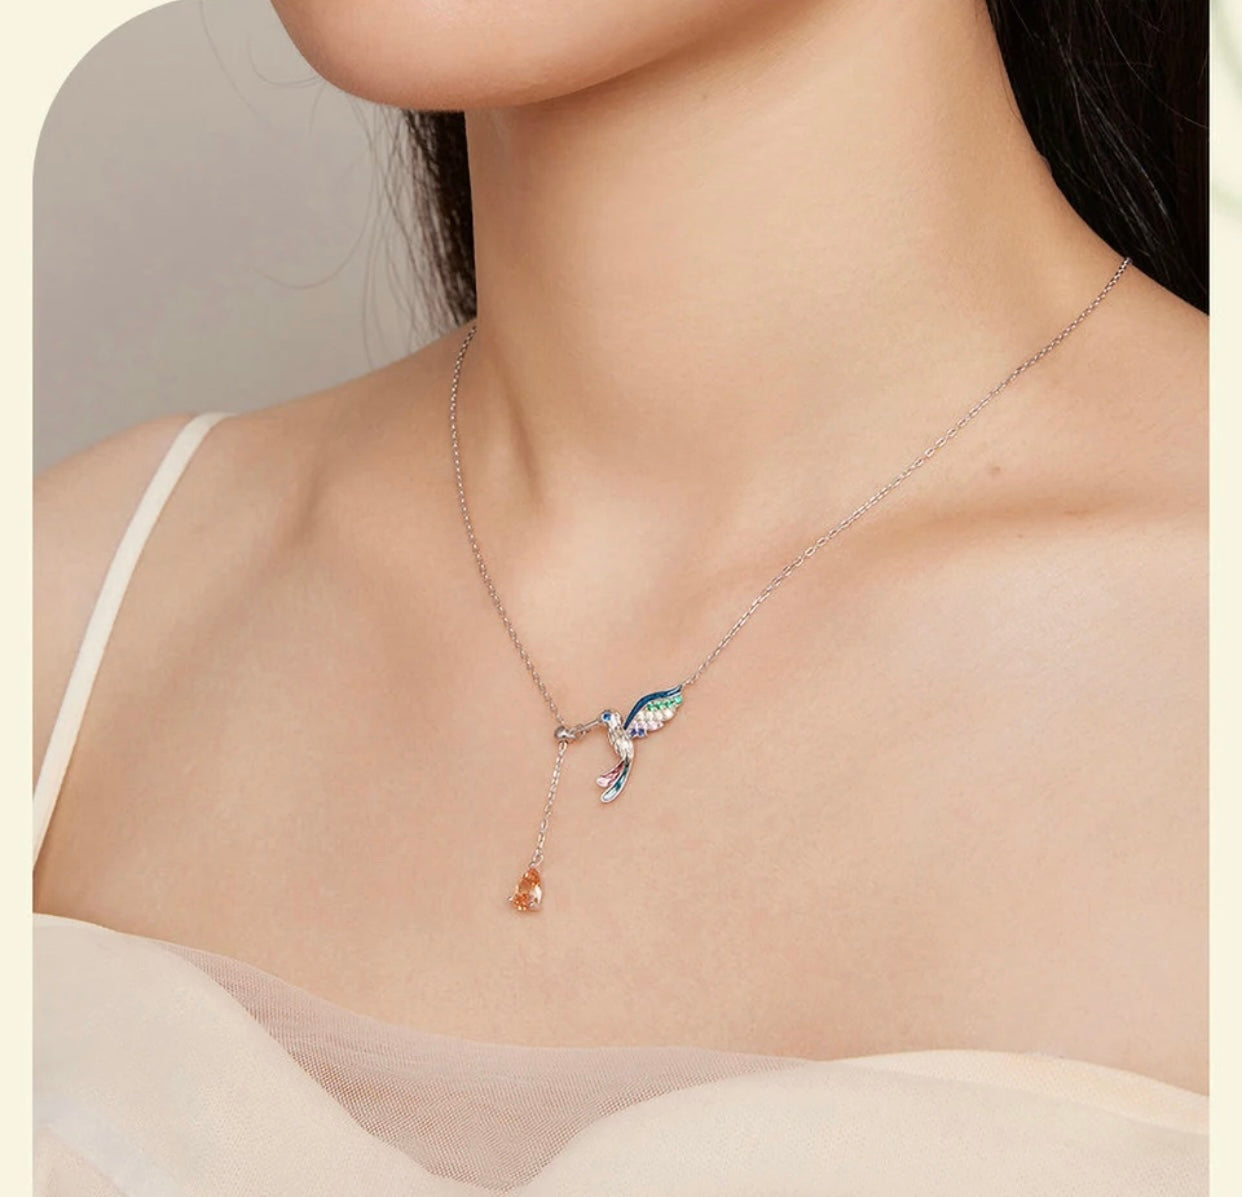 ANTILLEAN STERLING SILVER HUMMINGBIRD PENDENT NECKLACE